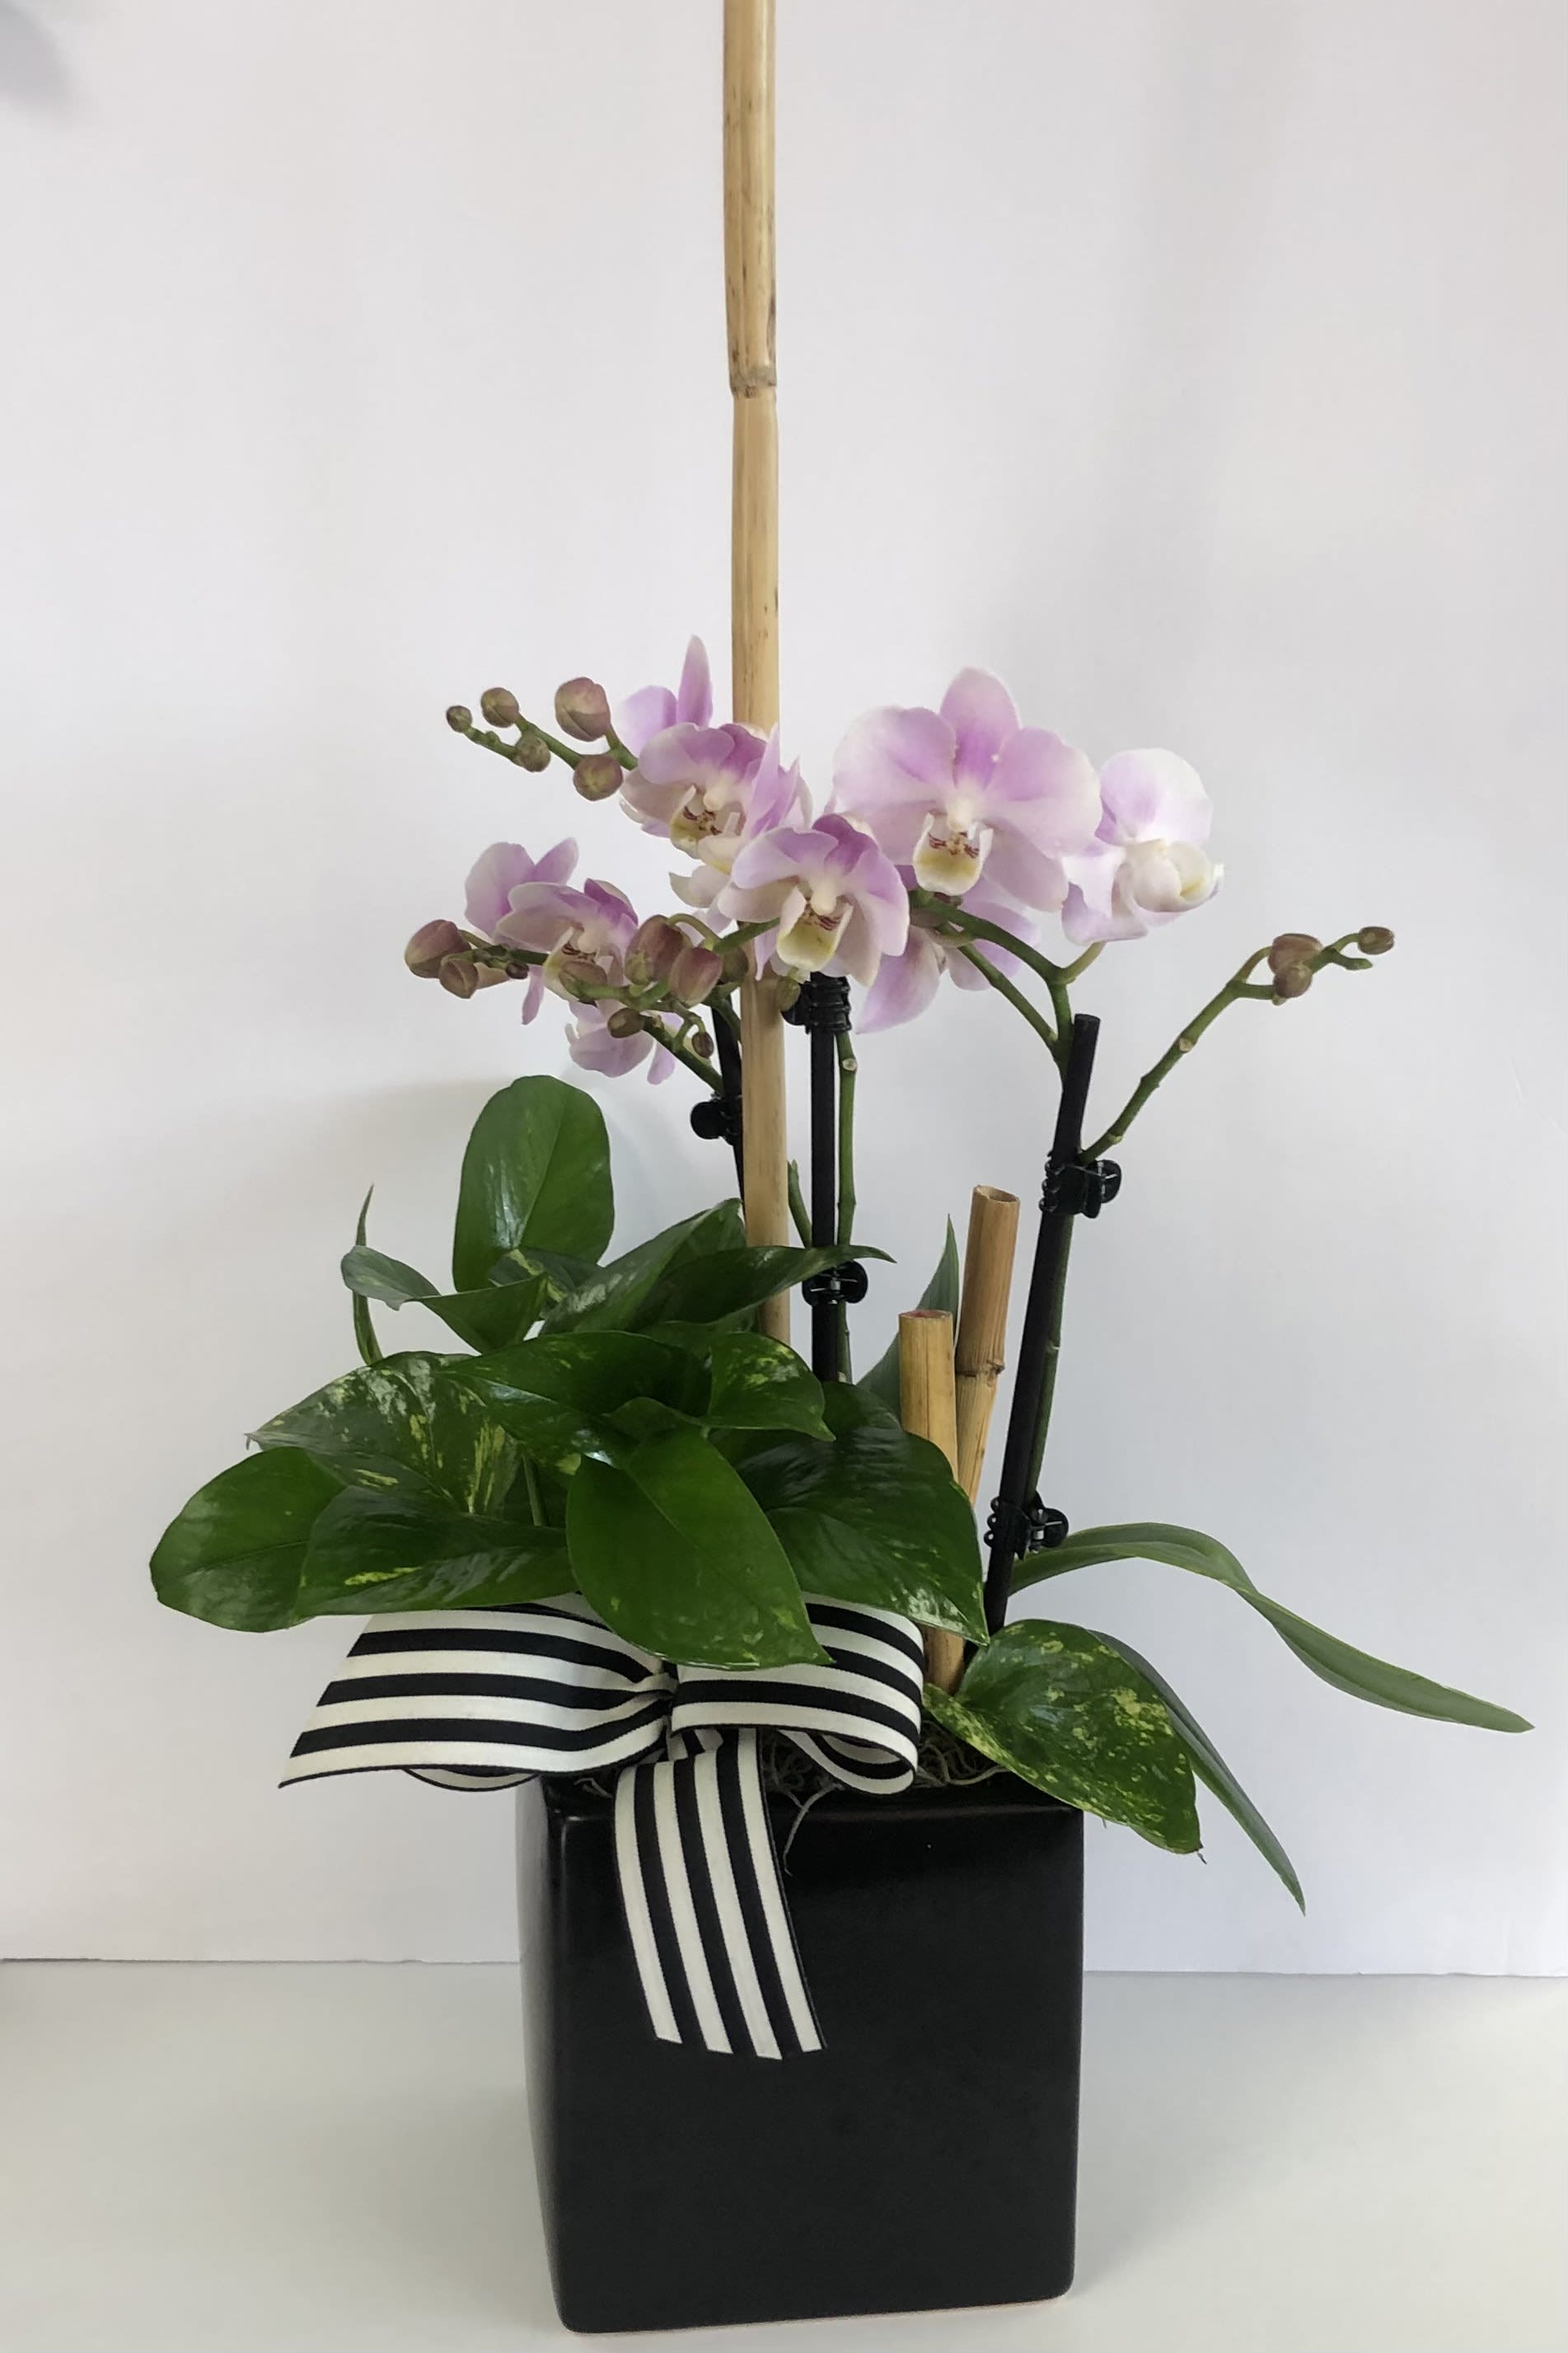 green plant and blooming orchids - 2 green plants and 4'blooming orchid